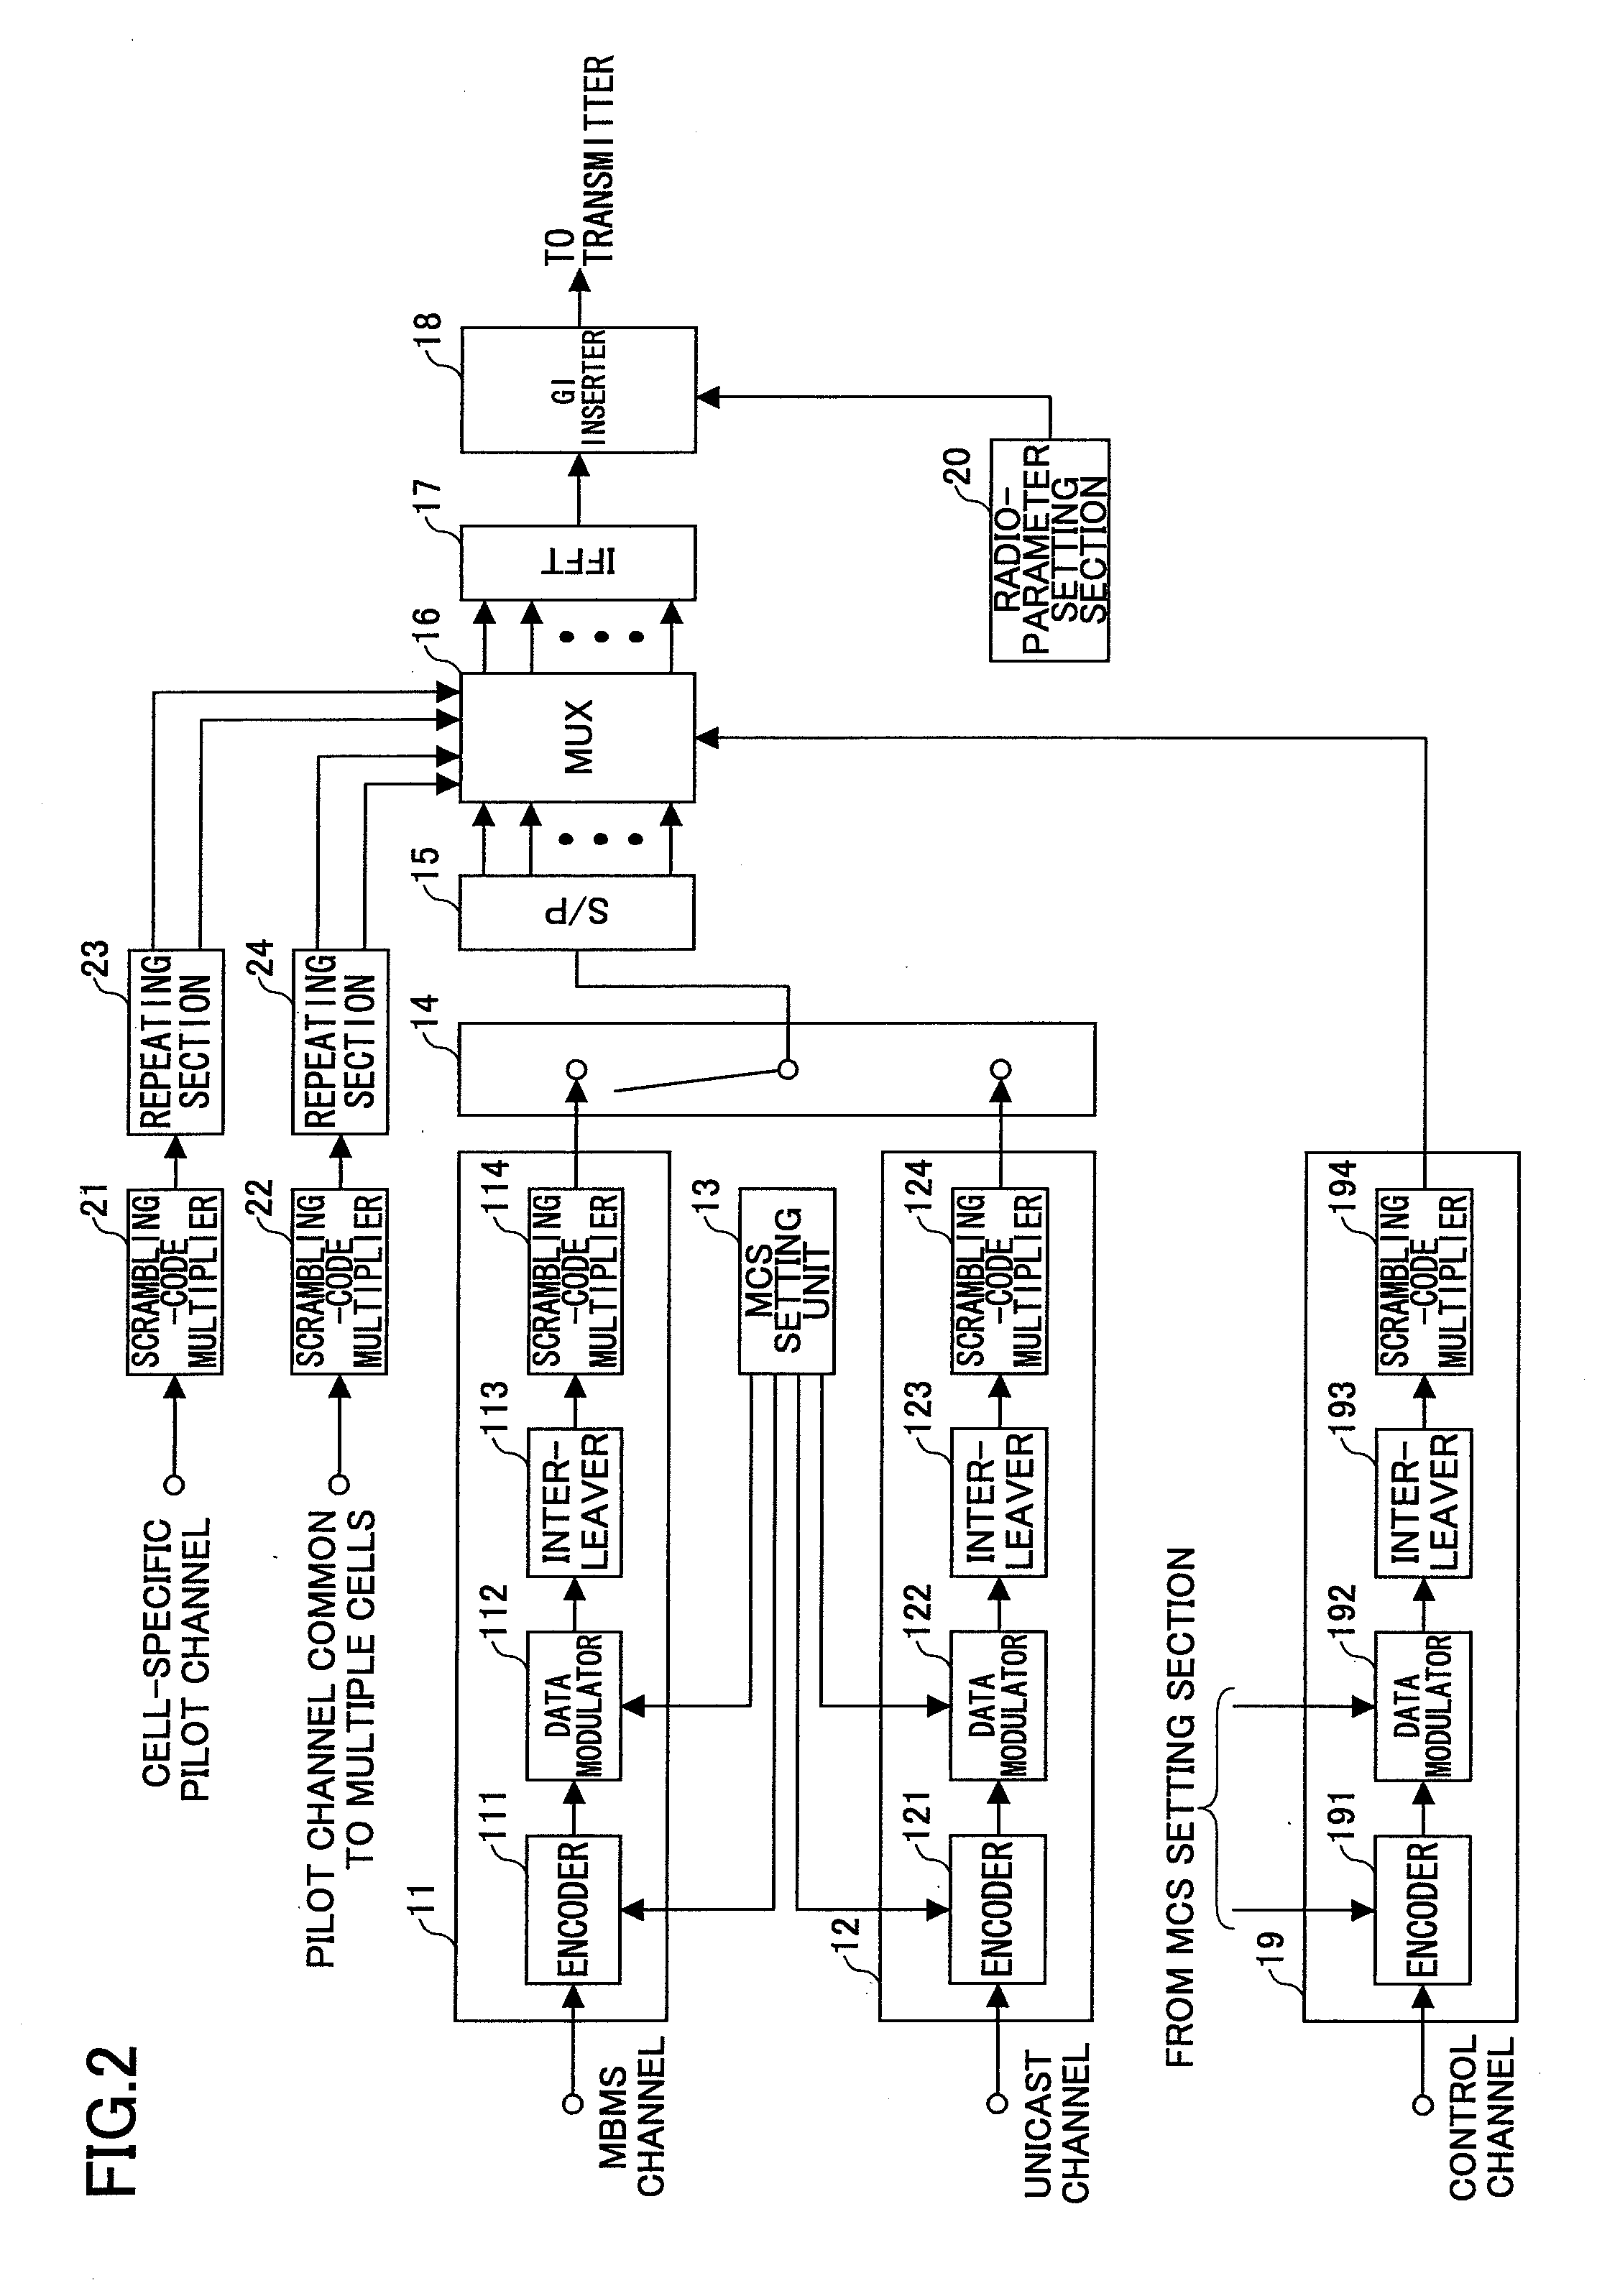 Transmitting and receiving apparatuses and methods